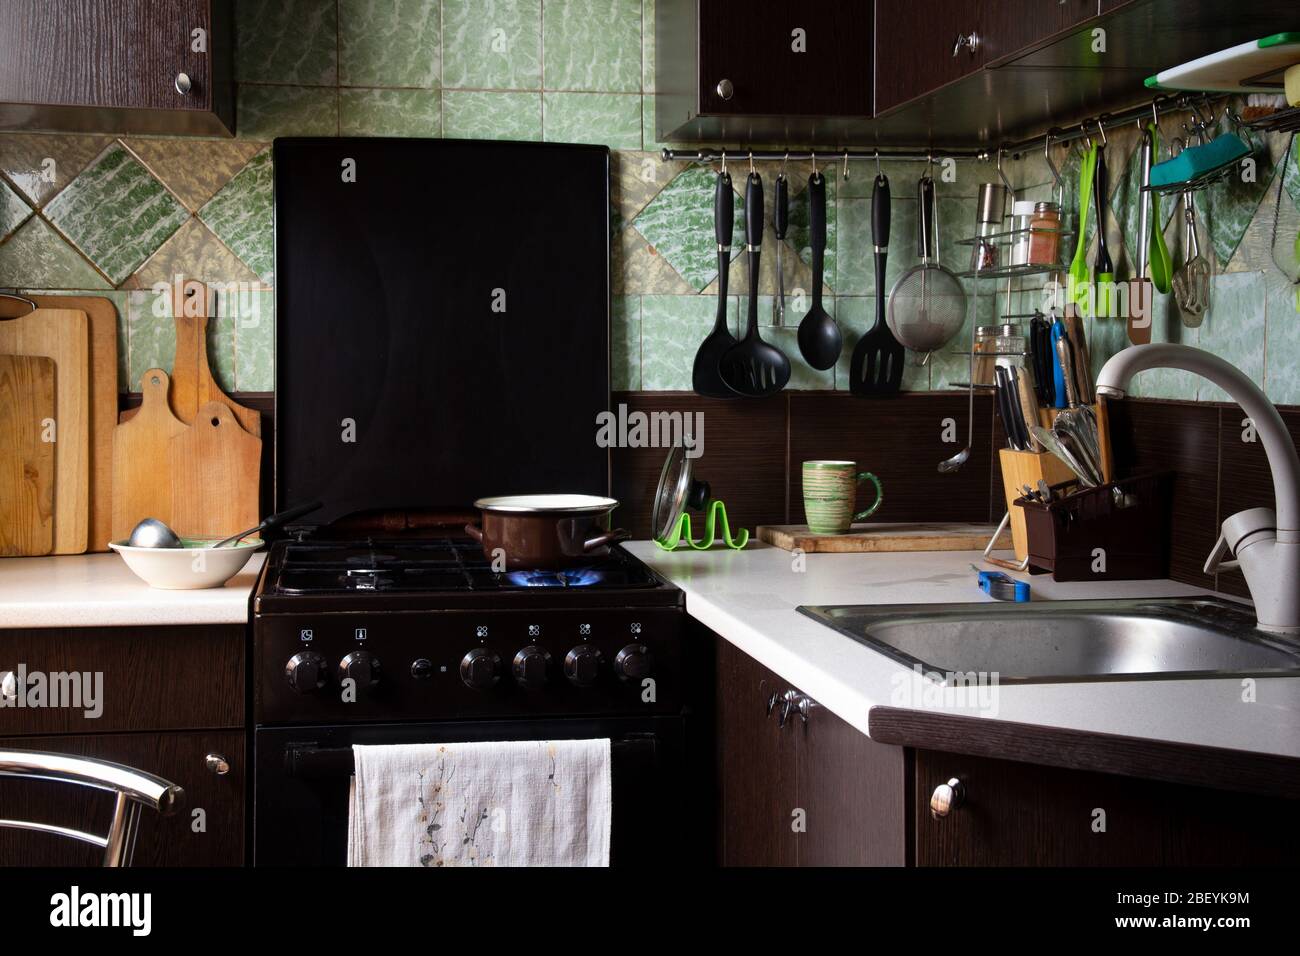 Interior Of A Kitchen In A Small Apartment 2BEYK9M 